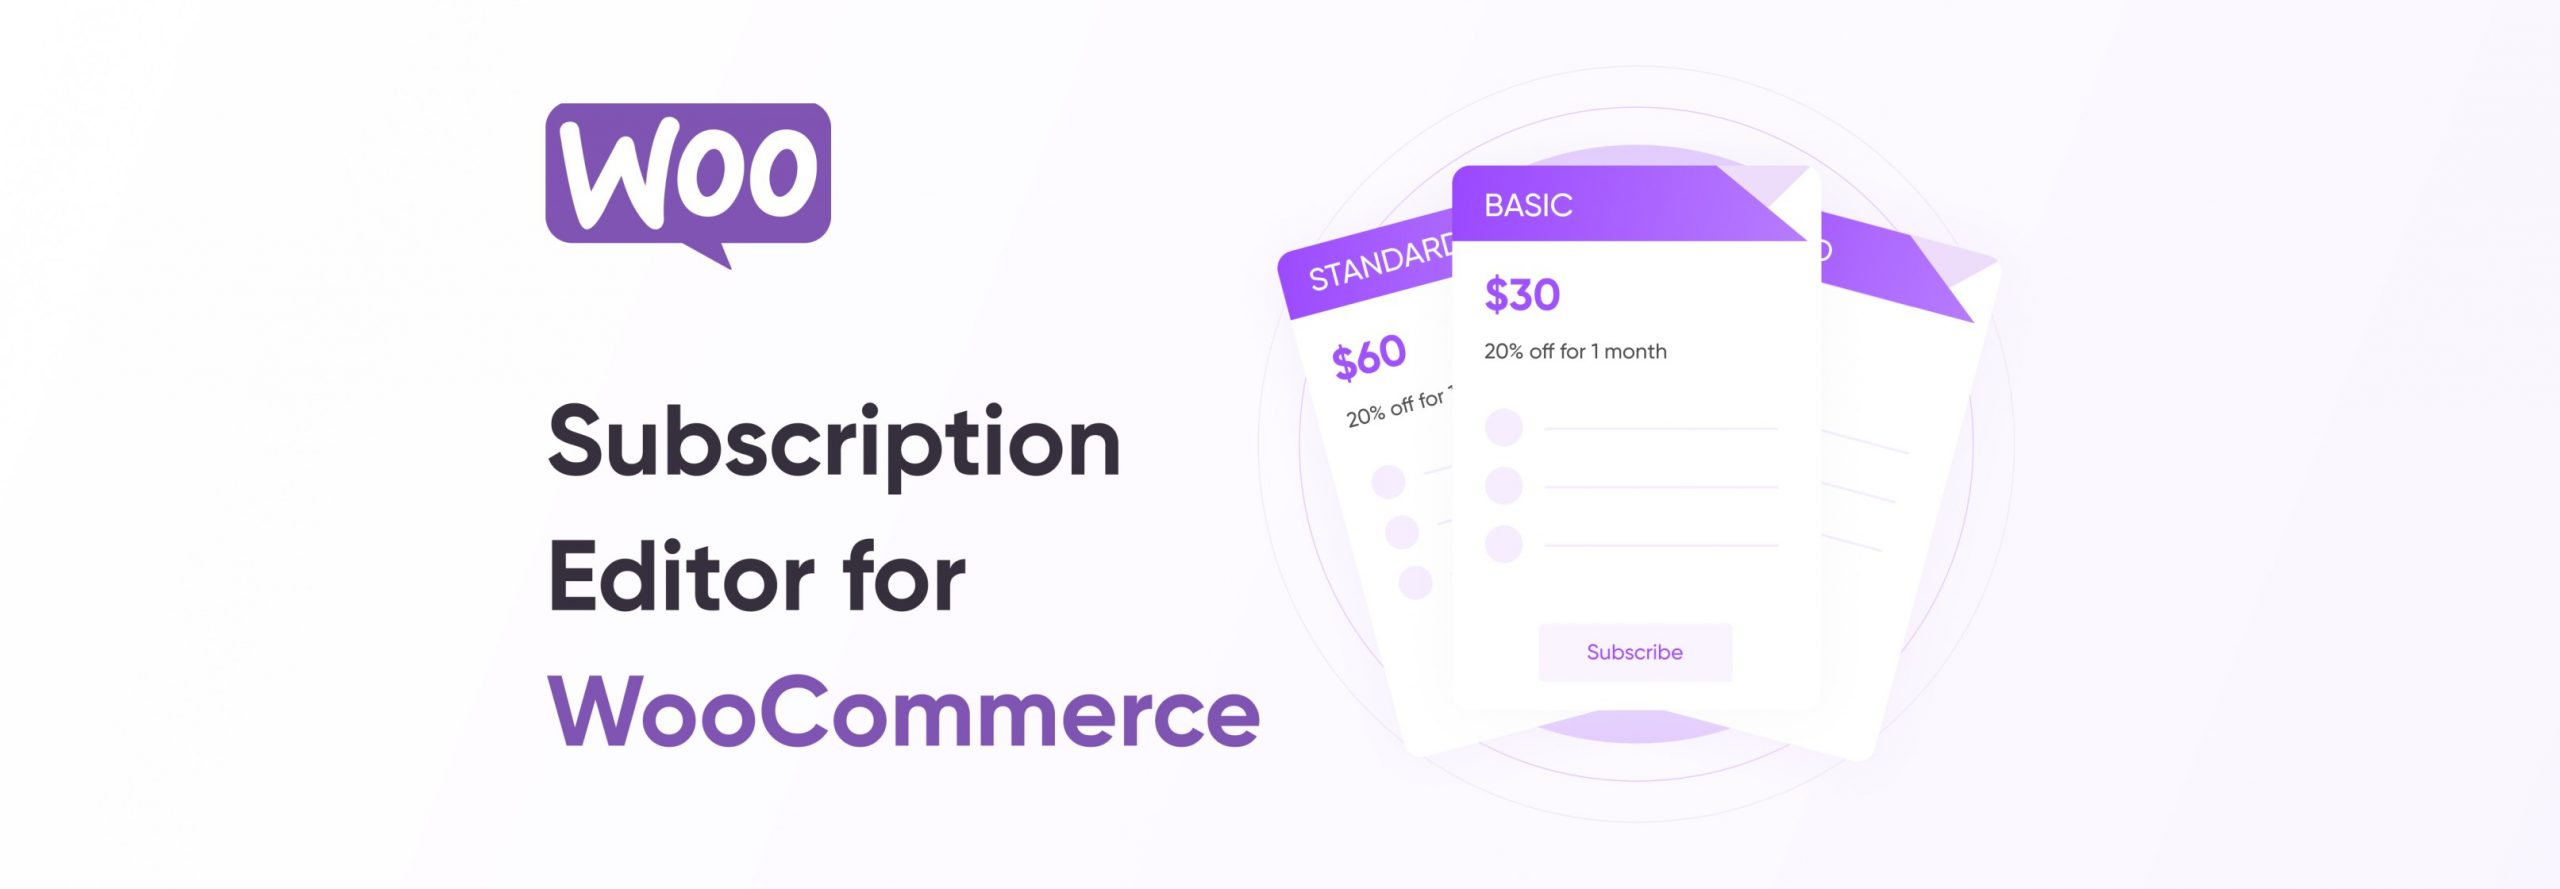 Subscription Editor for WooCommerce